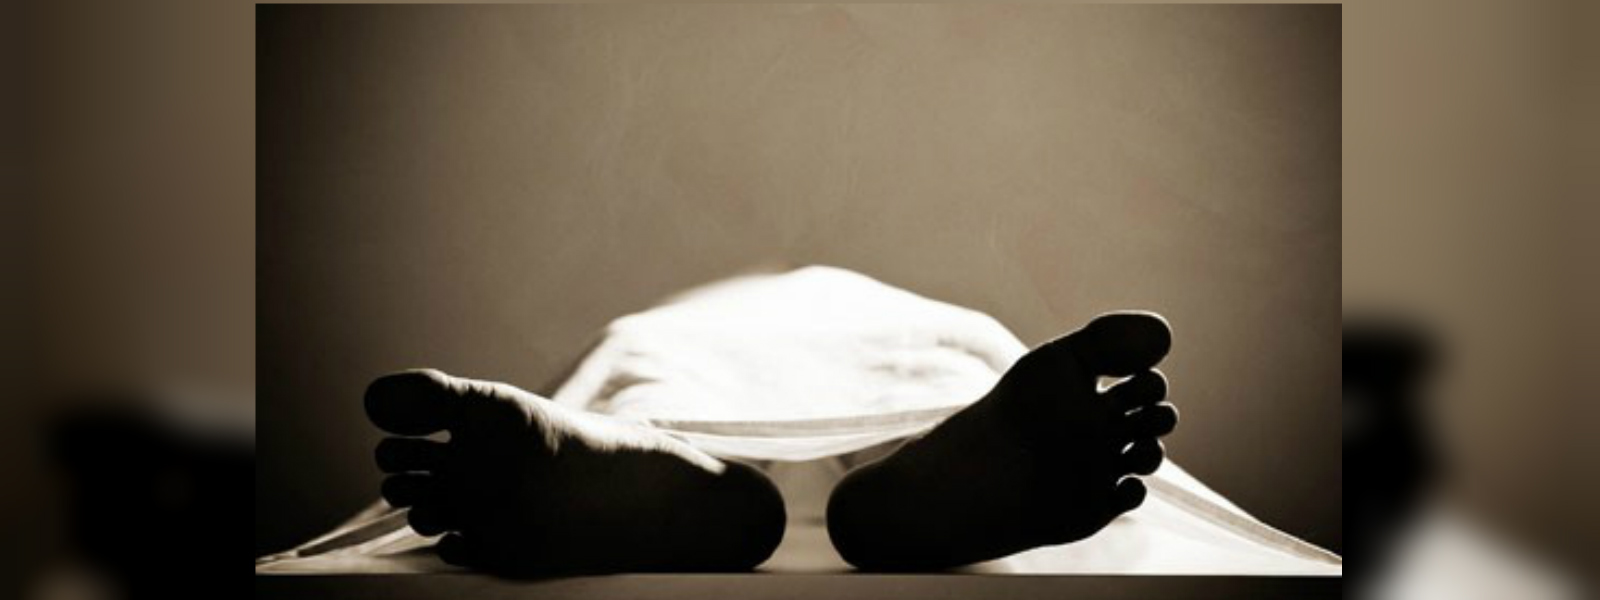 Unidentified corpse found in Udanwela junction